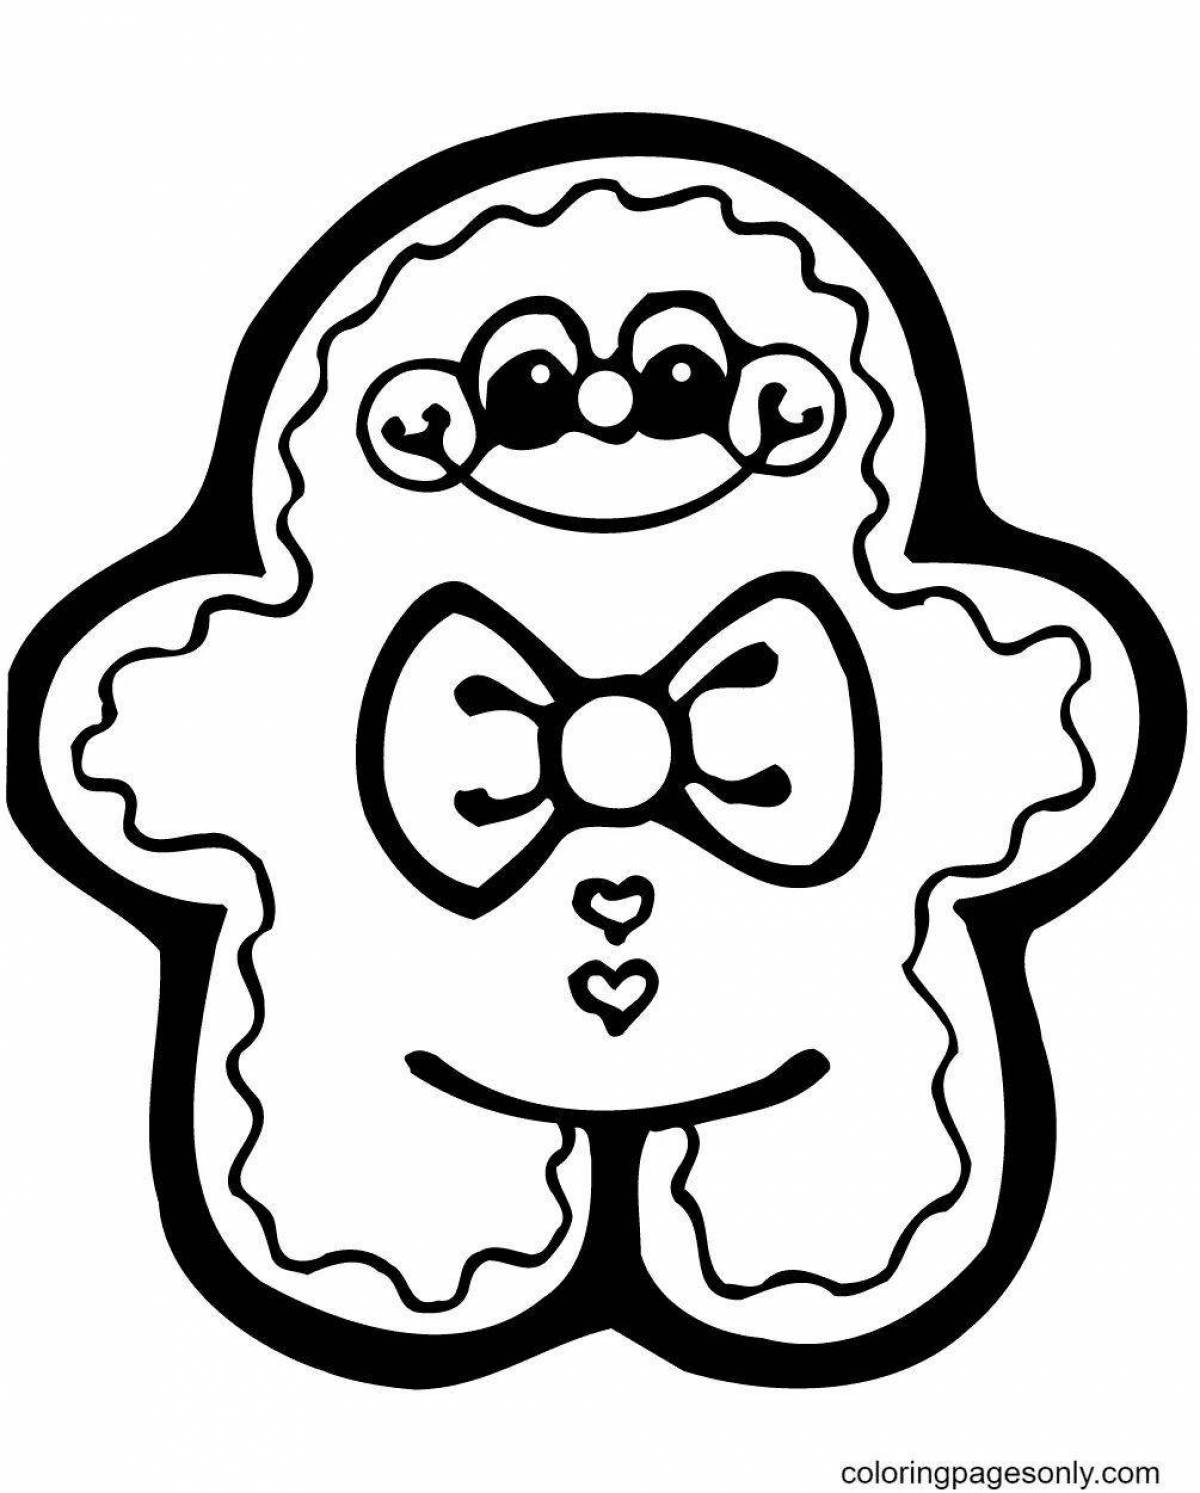 Happy gingerbread coloring page